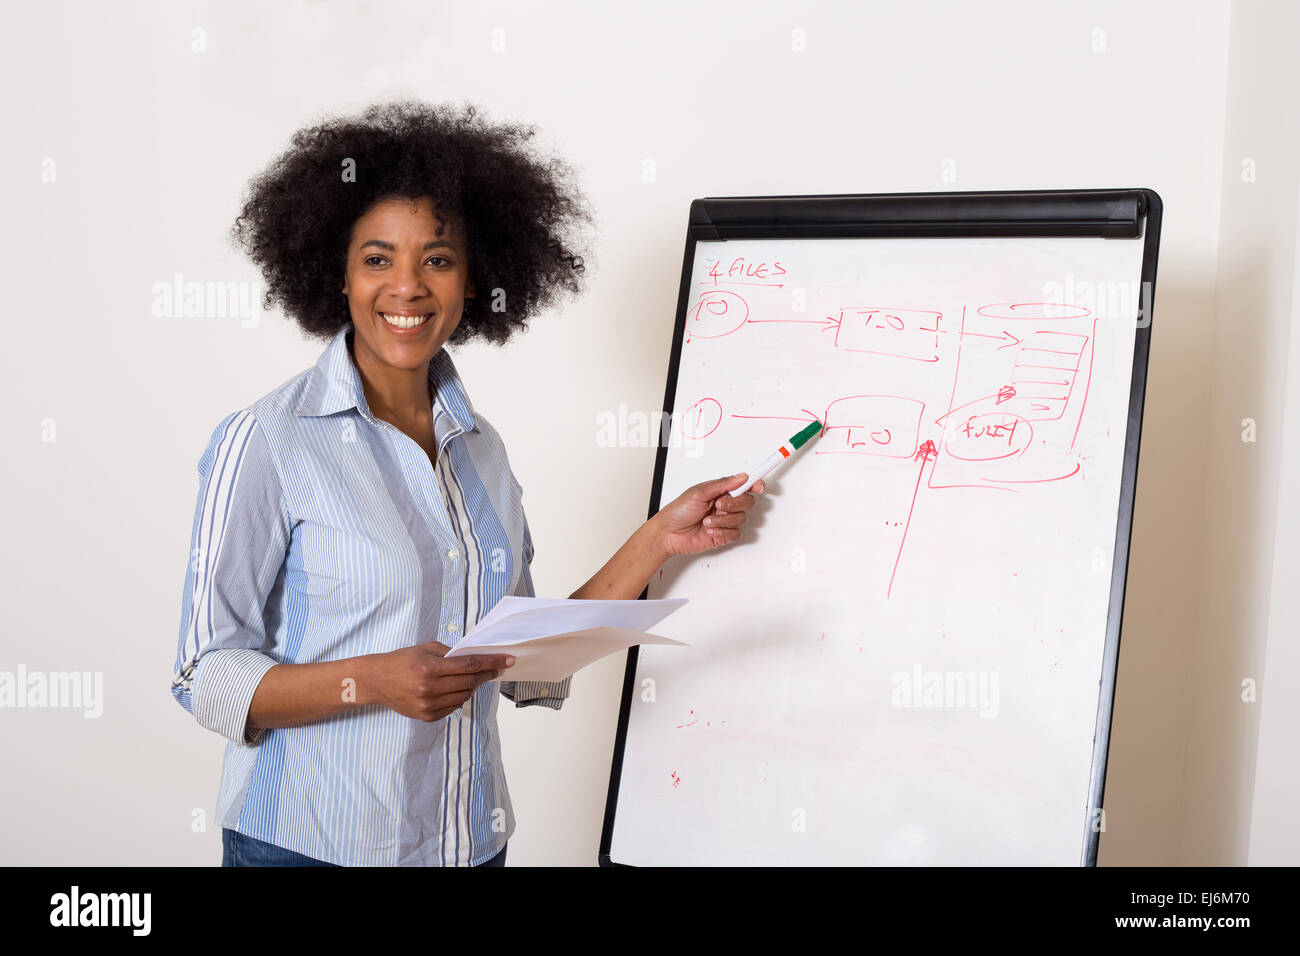 young woman pointing at a whiteboard during a business meeting. Stock Photo